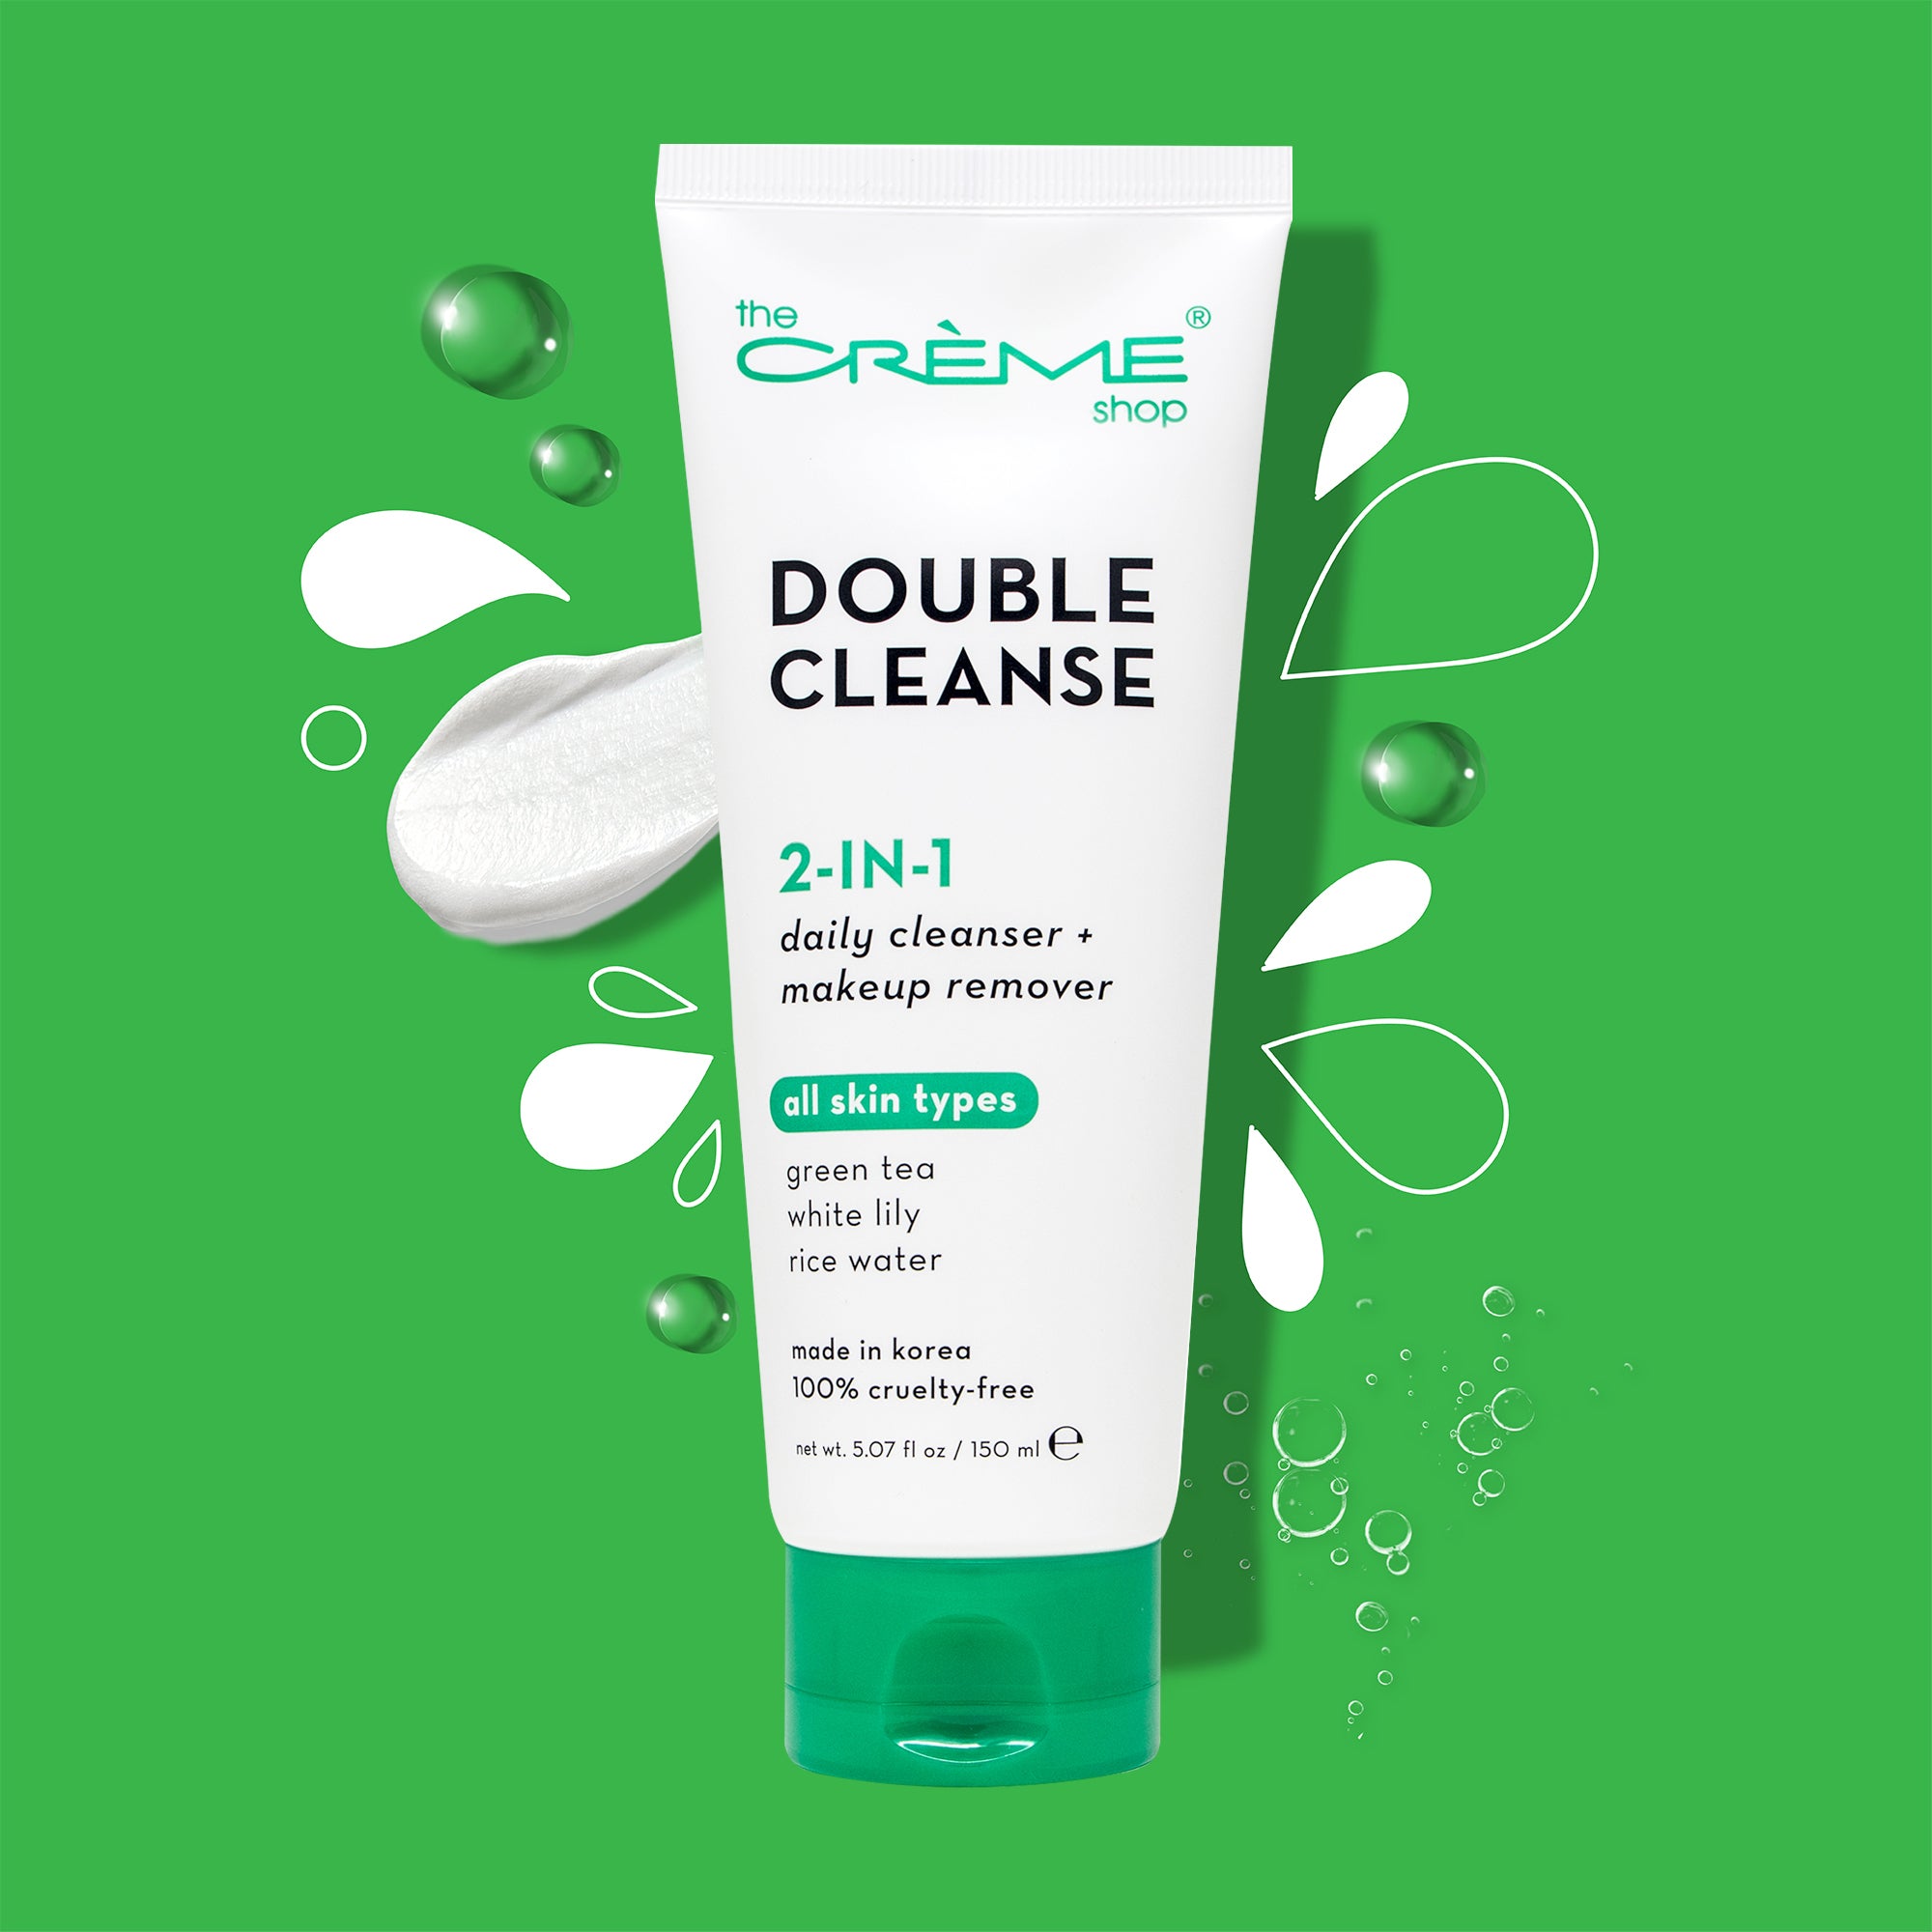 2-in-1 Facial Foam Cleanser | Green Tea + White Lily + Rice Water Facial Cleansers The Crème Shop 